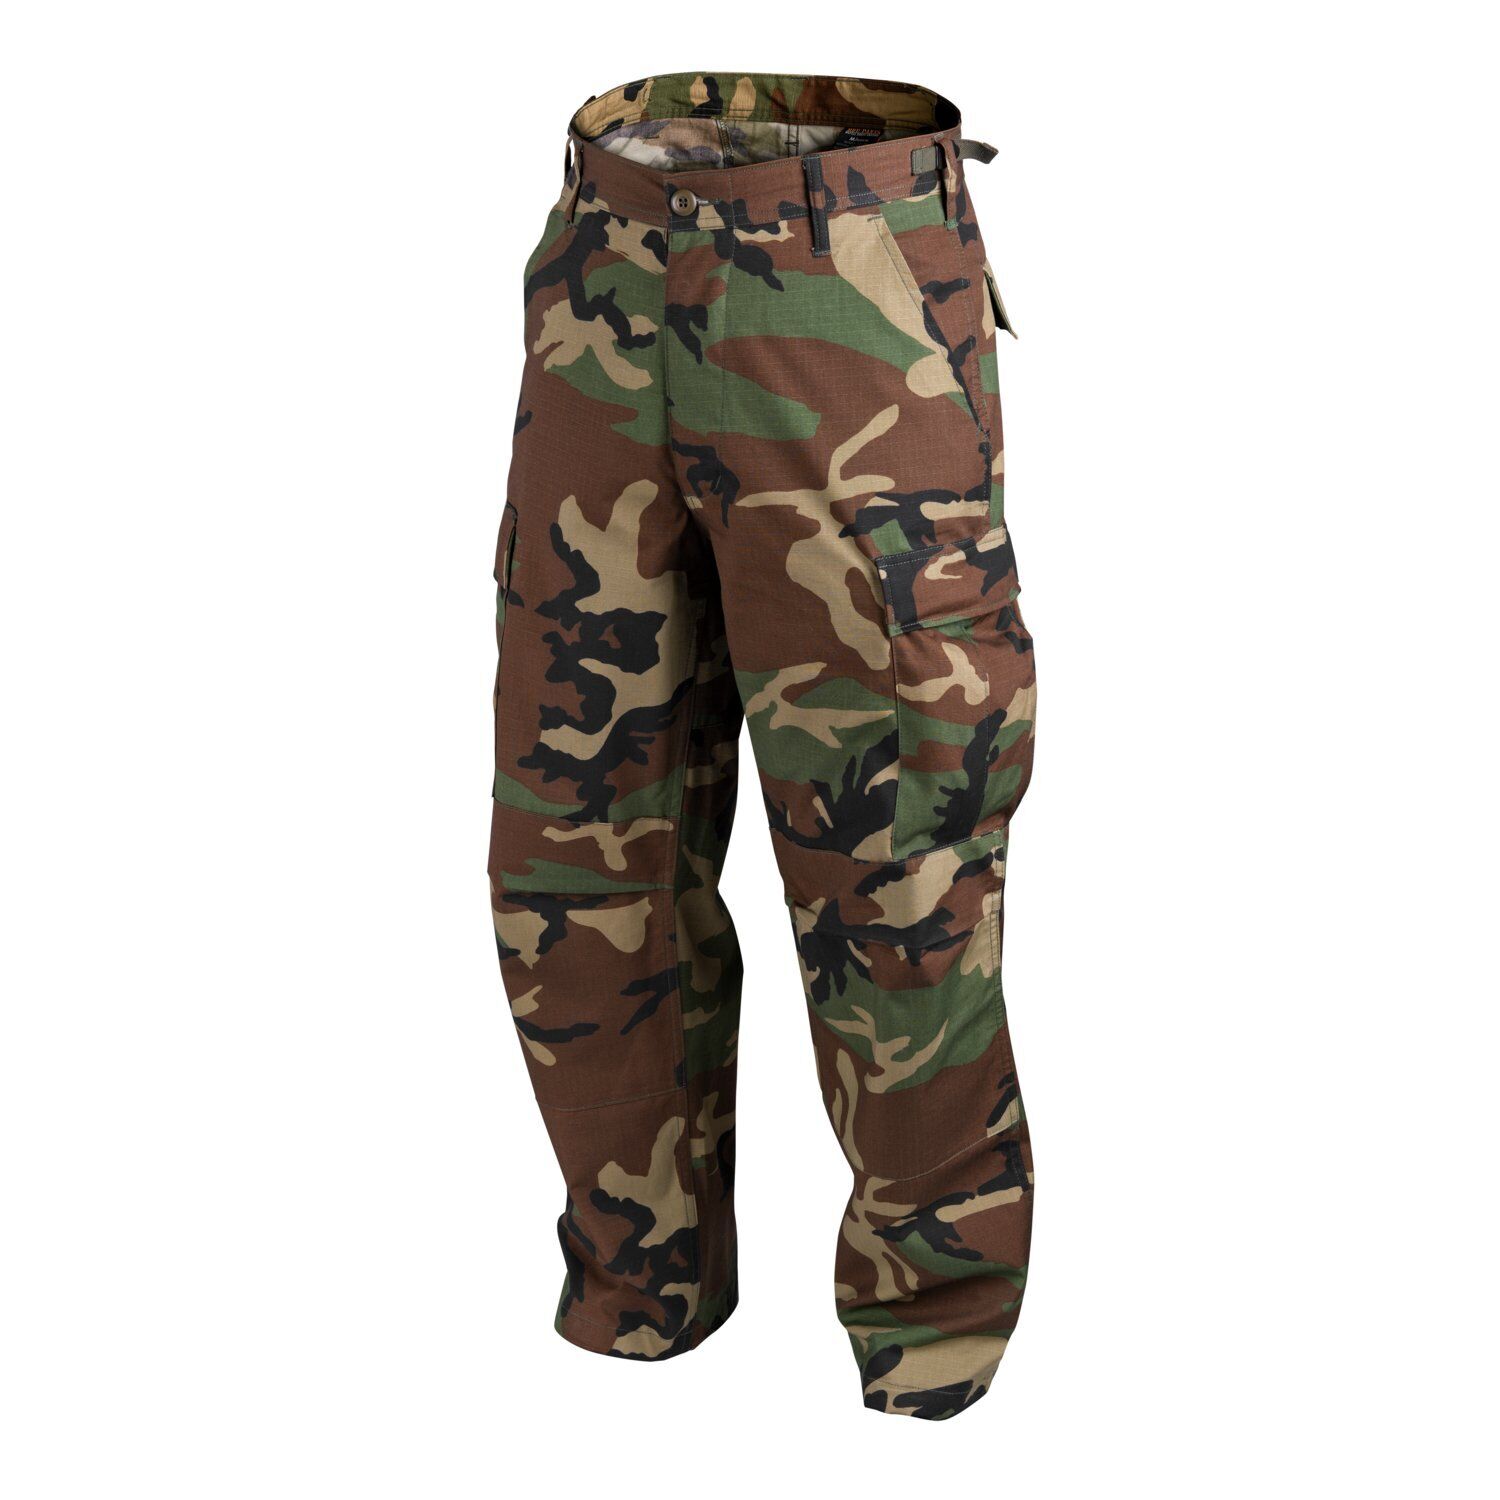 HELIKON-TEX BDU Pants Army Military Genuine Combat Tactical Polycotton Ripstop